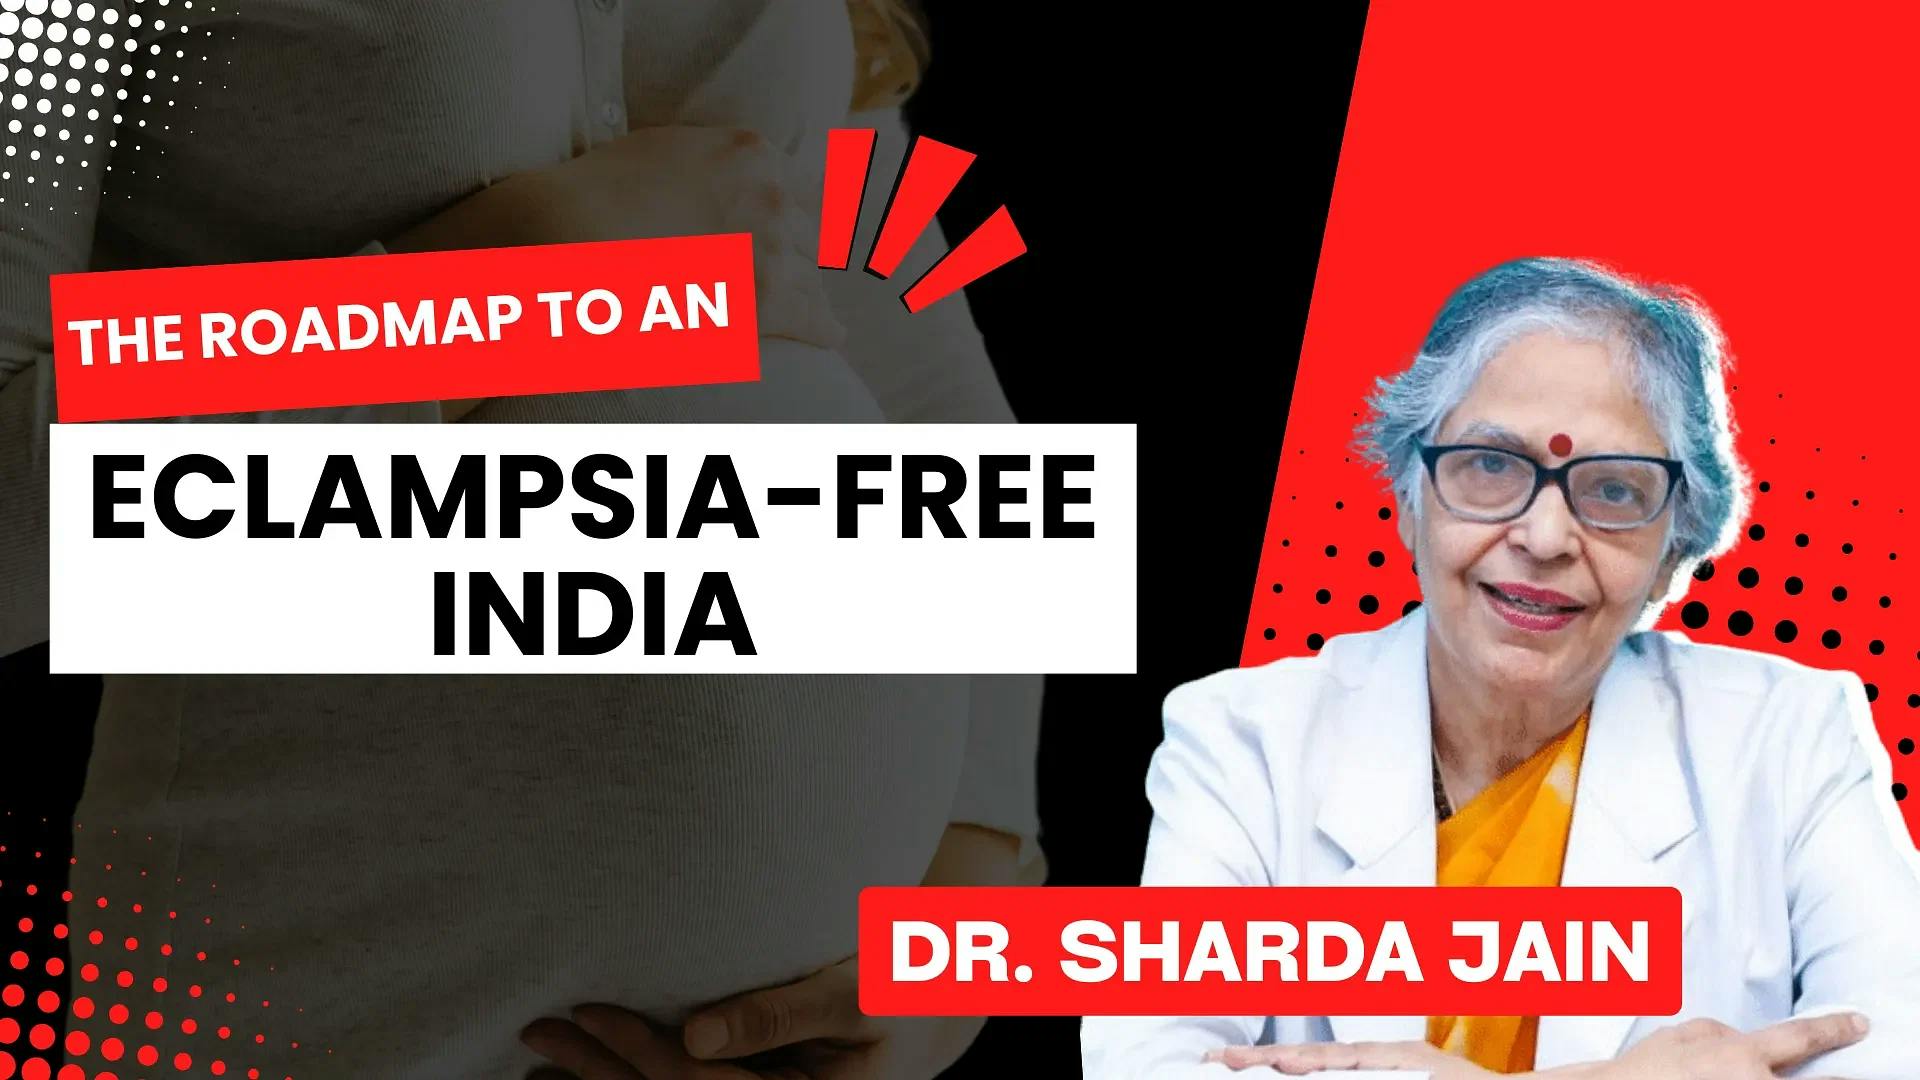 The Roadmap to an Eclampsia - Free India